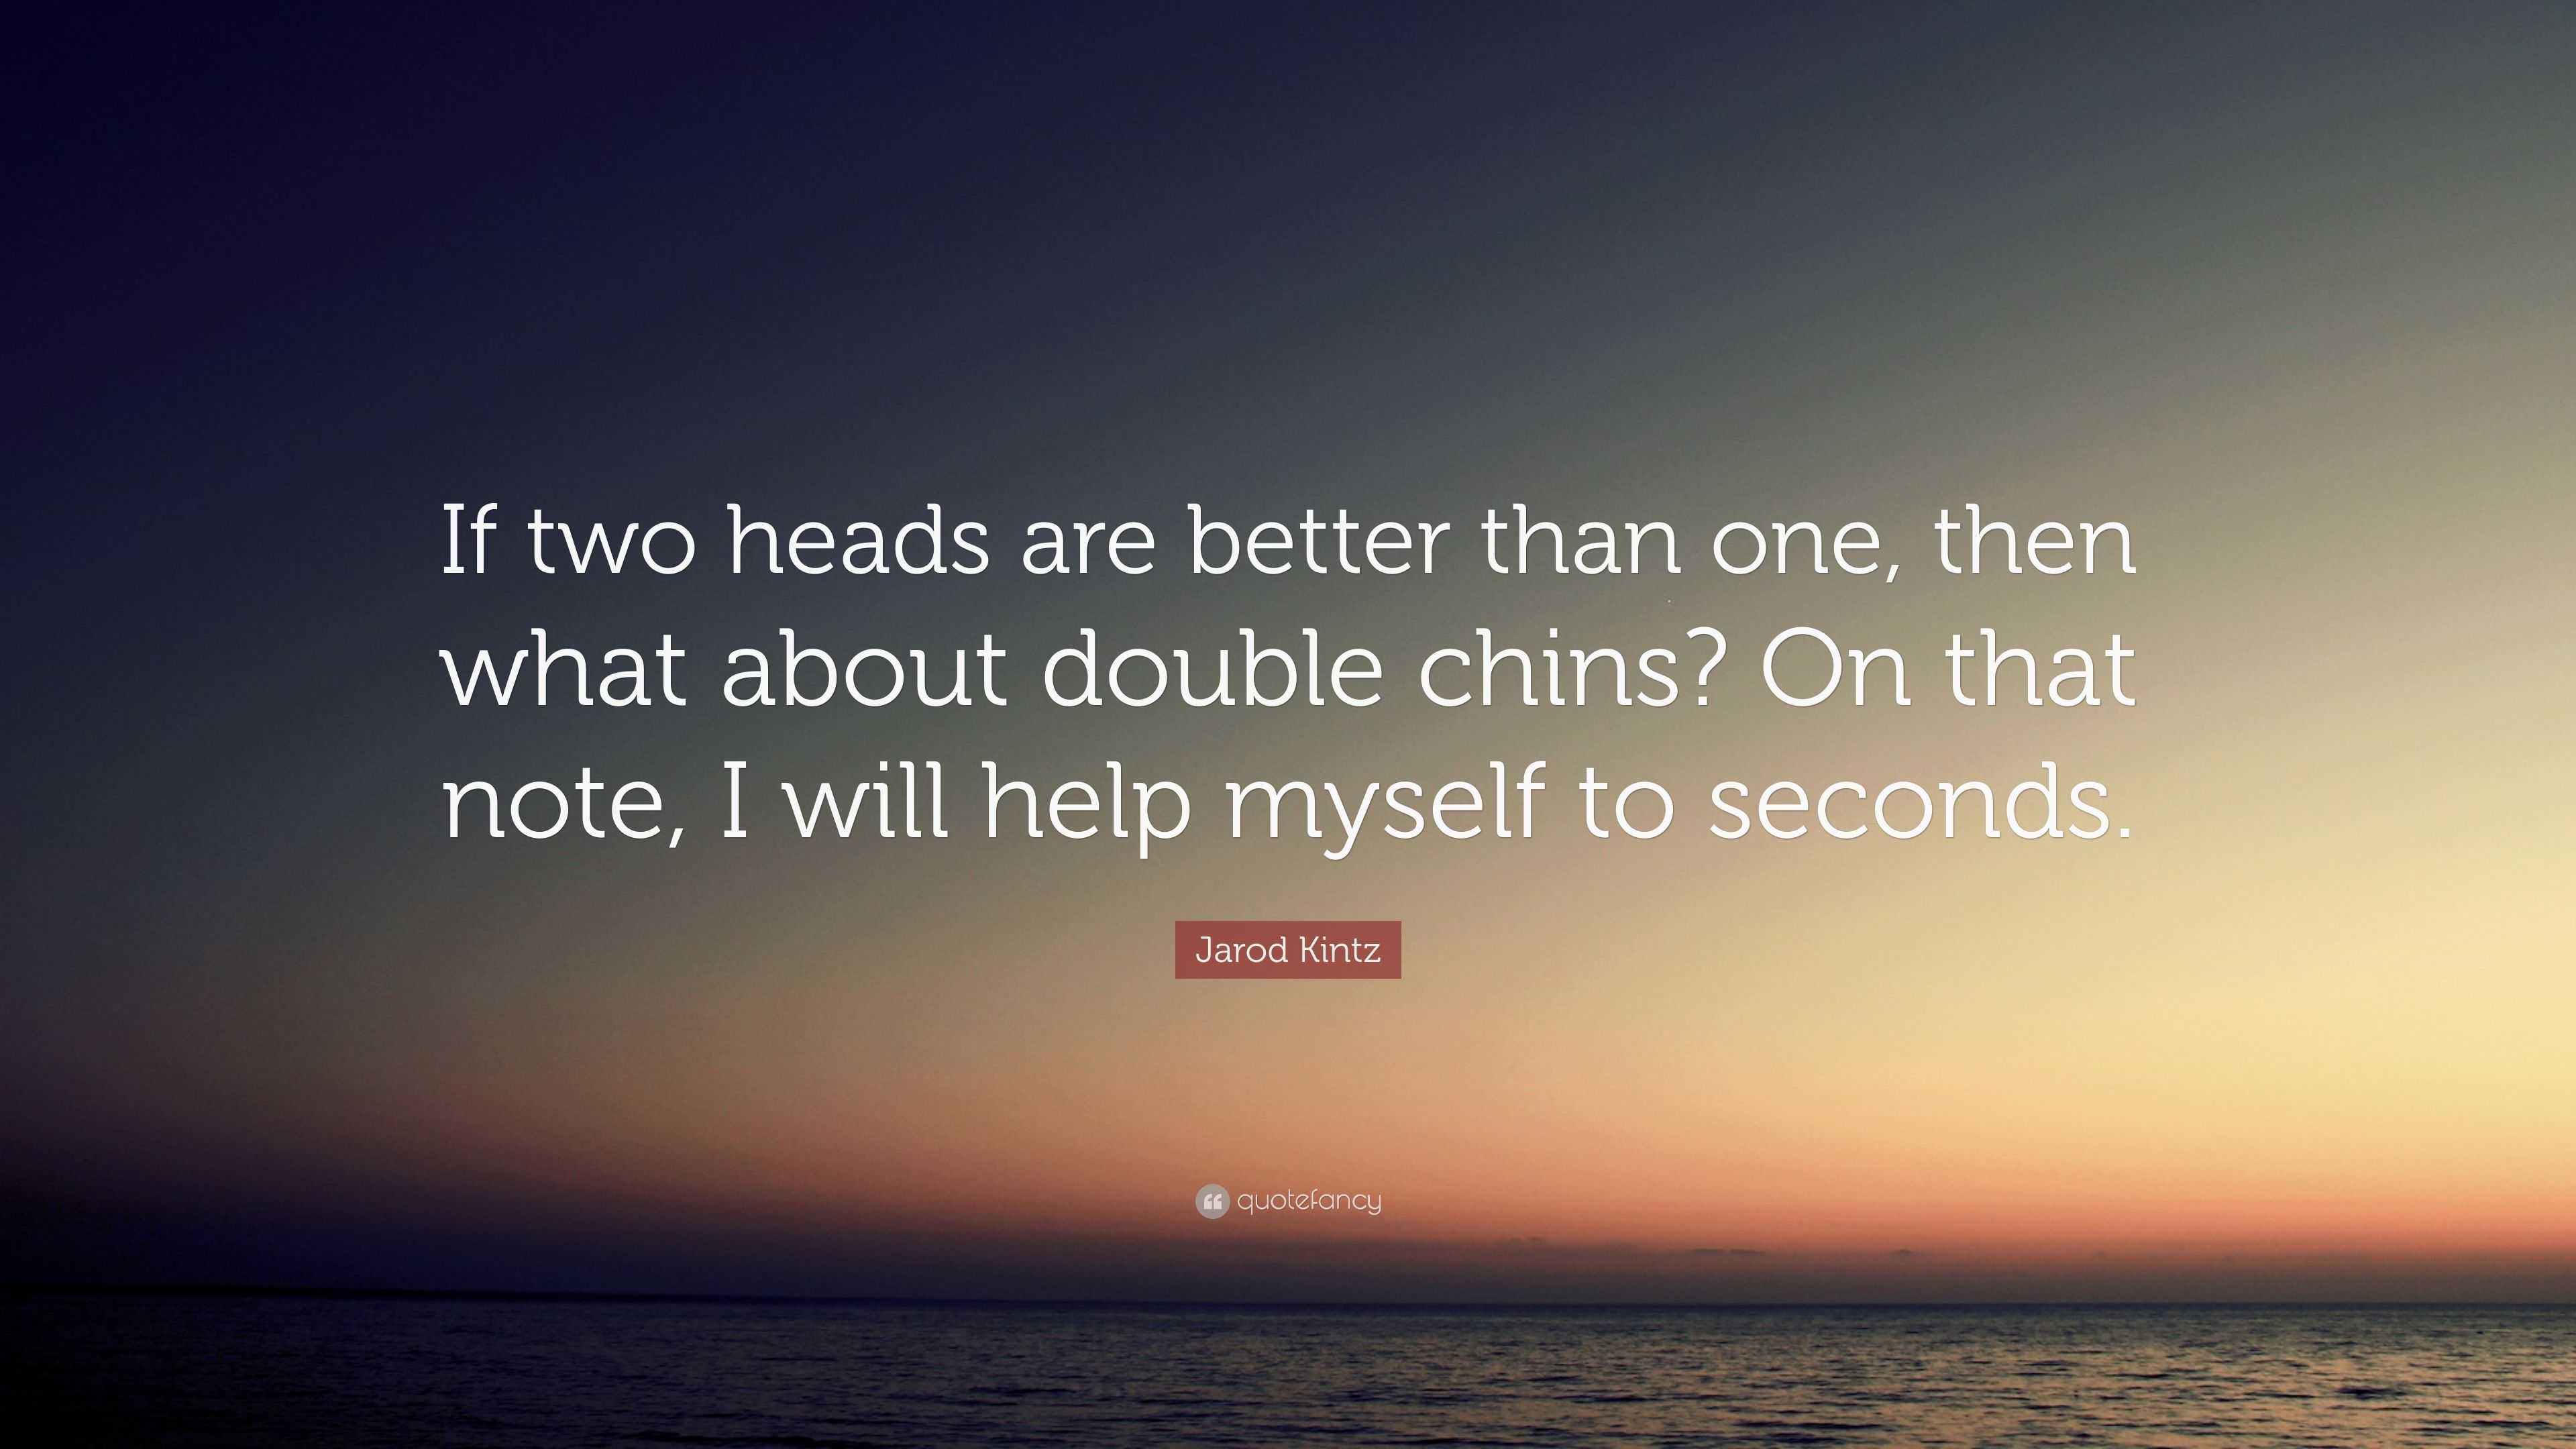 Jarod Kintz Quote: “If two heads are better than one, then what about double  chins? On